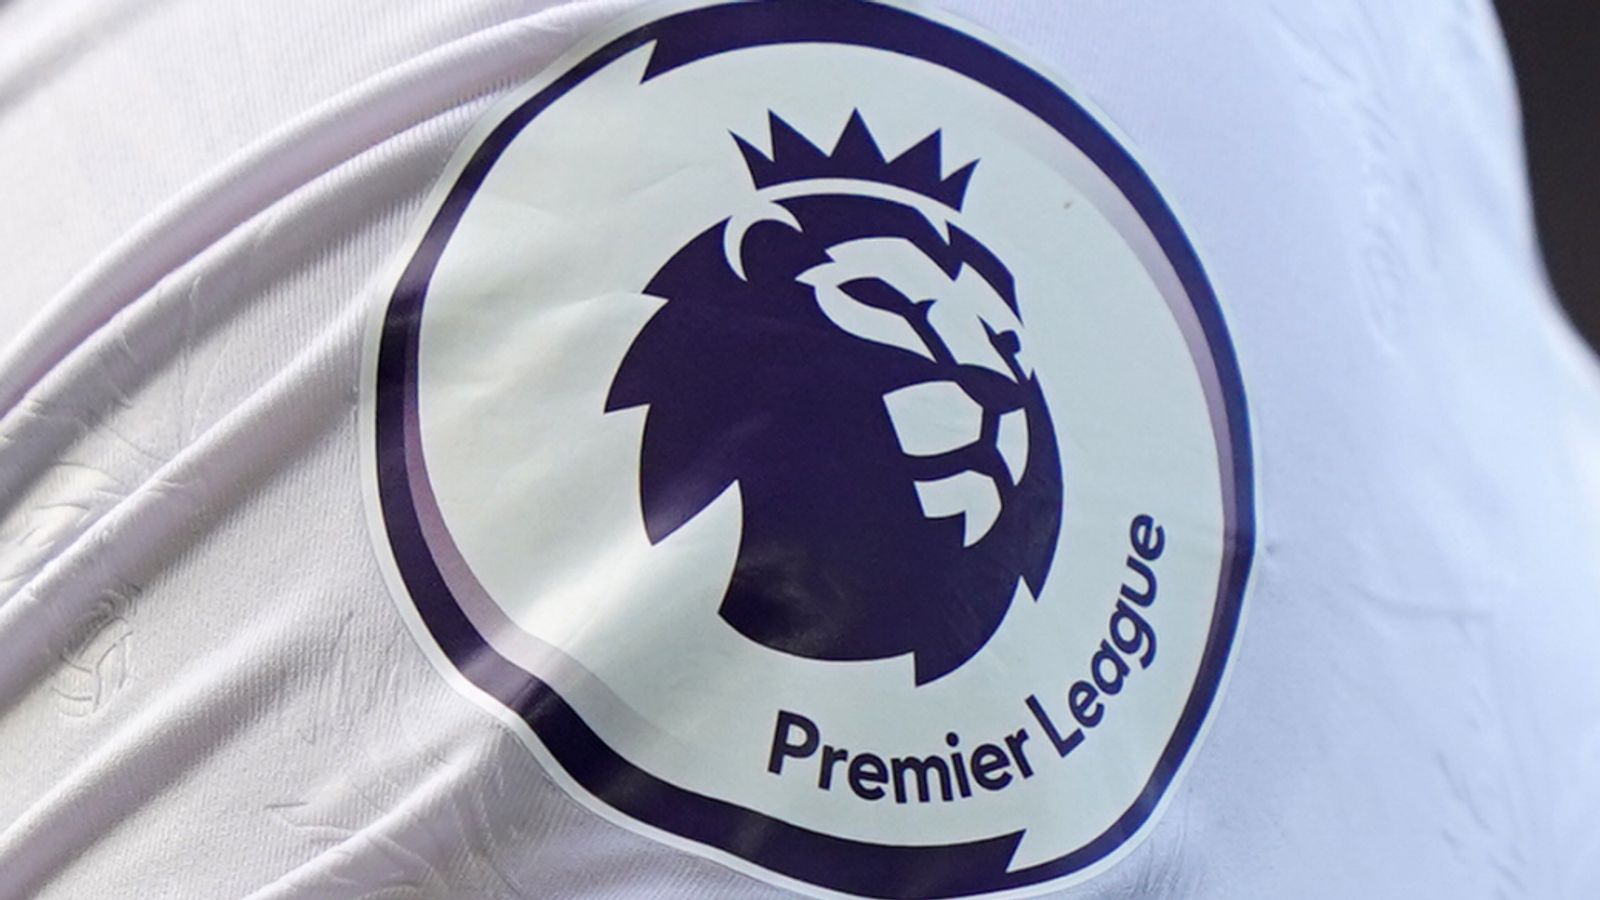 Premier League clubs agree new financial rules, with EFL sides to be